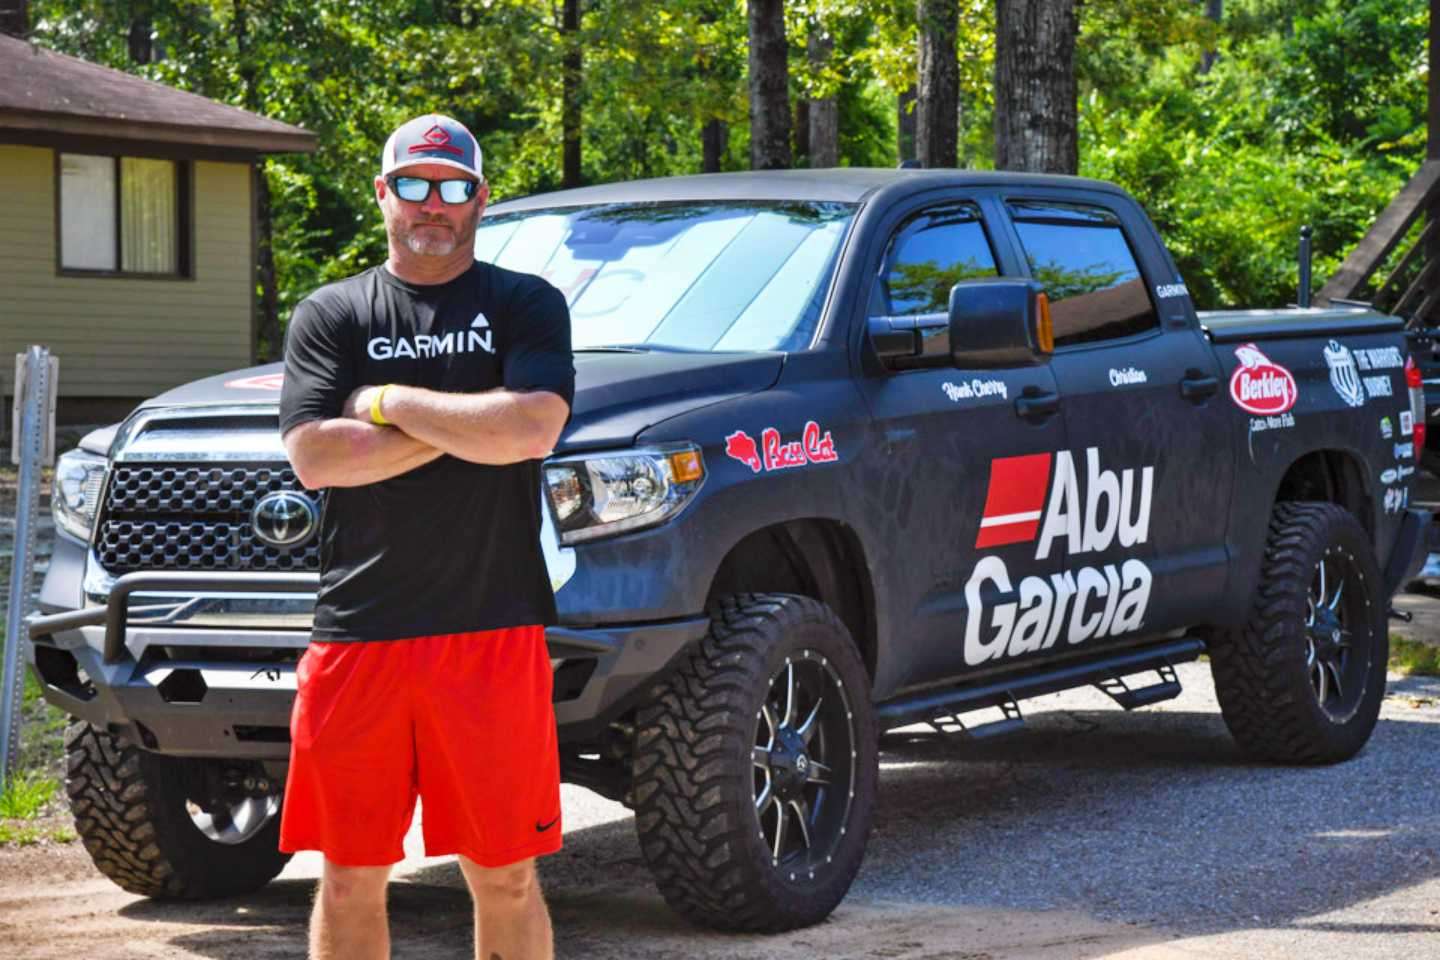 Meet Hank Cherry, the 2020 Bassmaster Classic champion. The most coveted trophy in bass fishing rode home to North Carolina in his 2020 Toyota Tundra SR5 4x4 Double Cab. âWinning the Classic this year was a dream come true, something that I will remember for life.â 